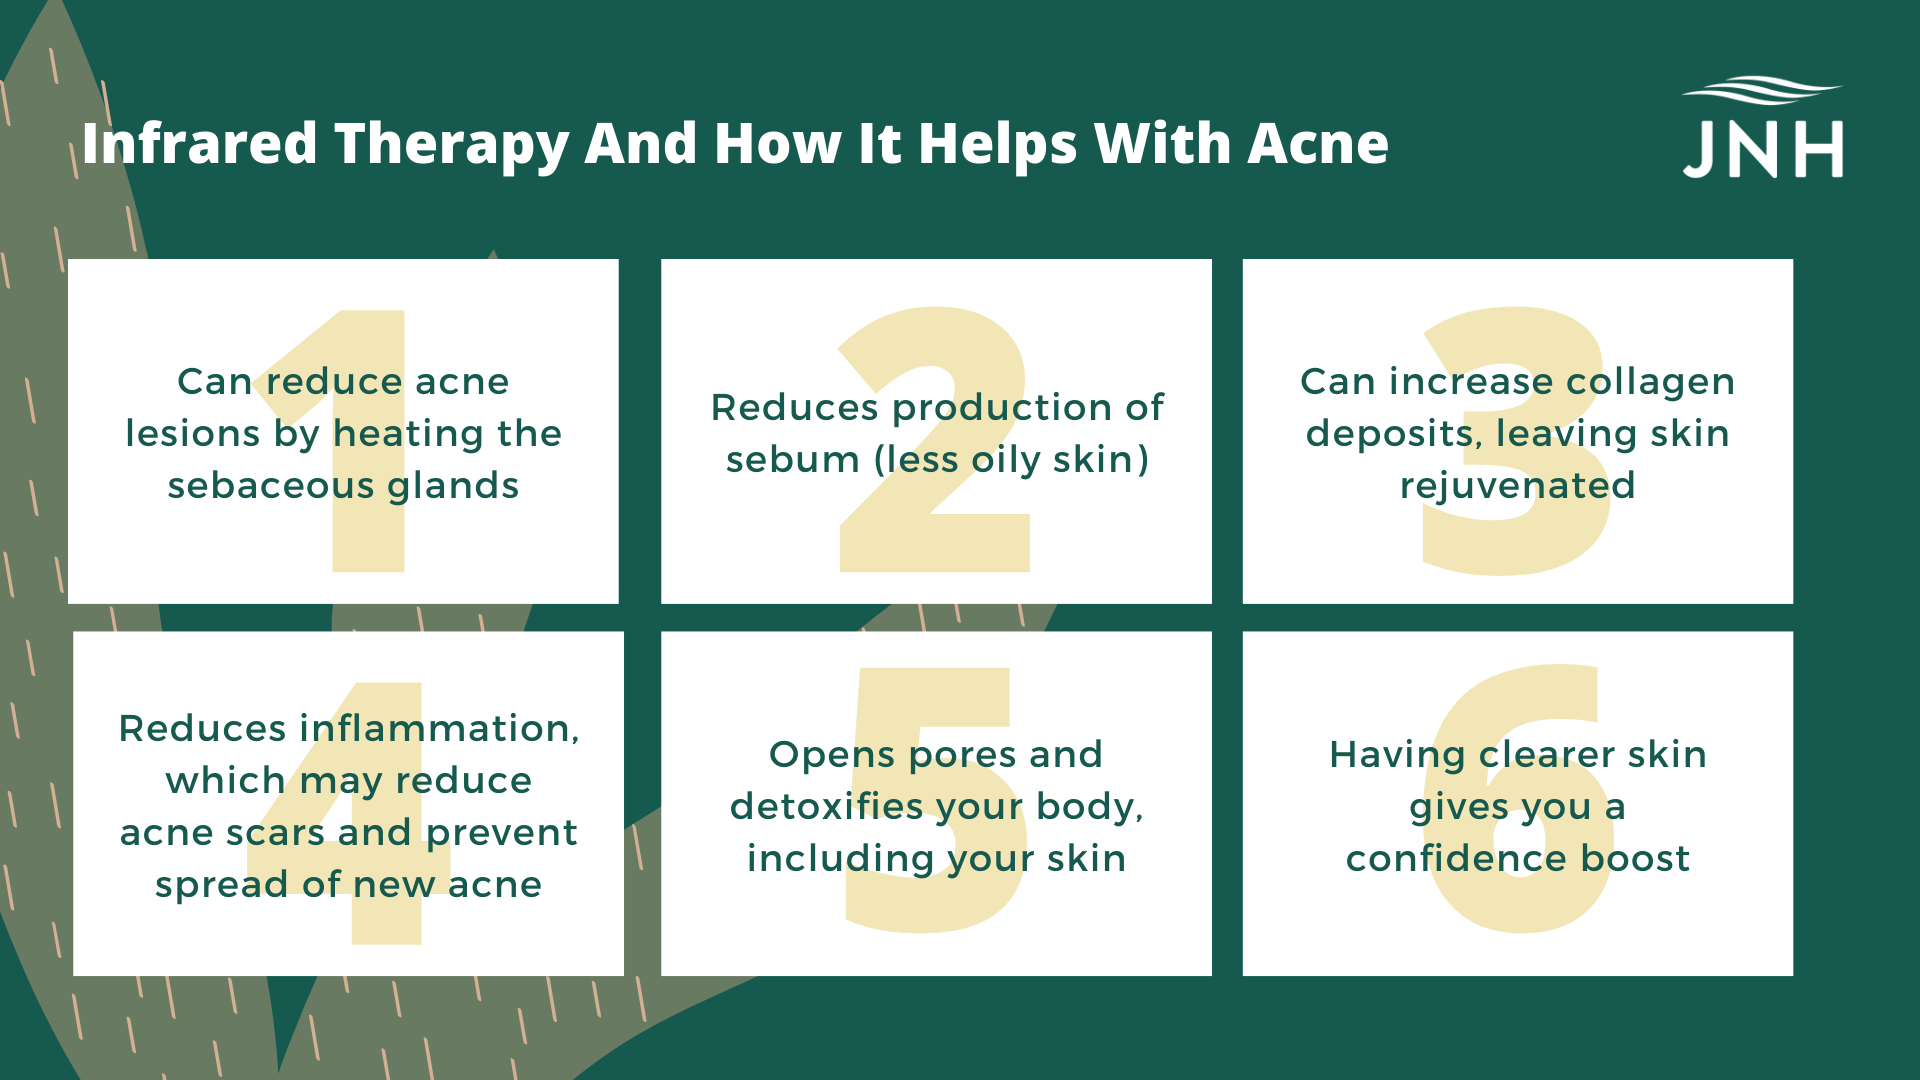 Infrared Therapy and How it Helps with Acne